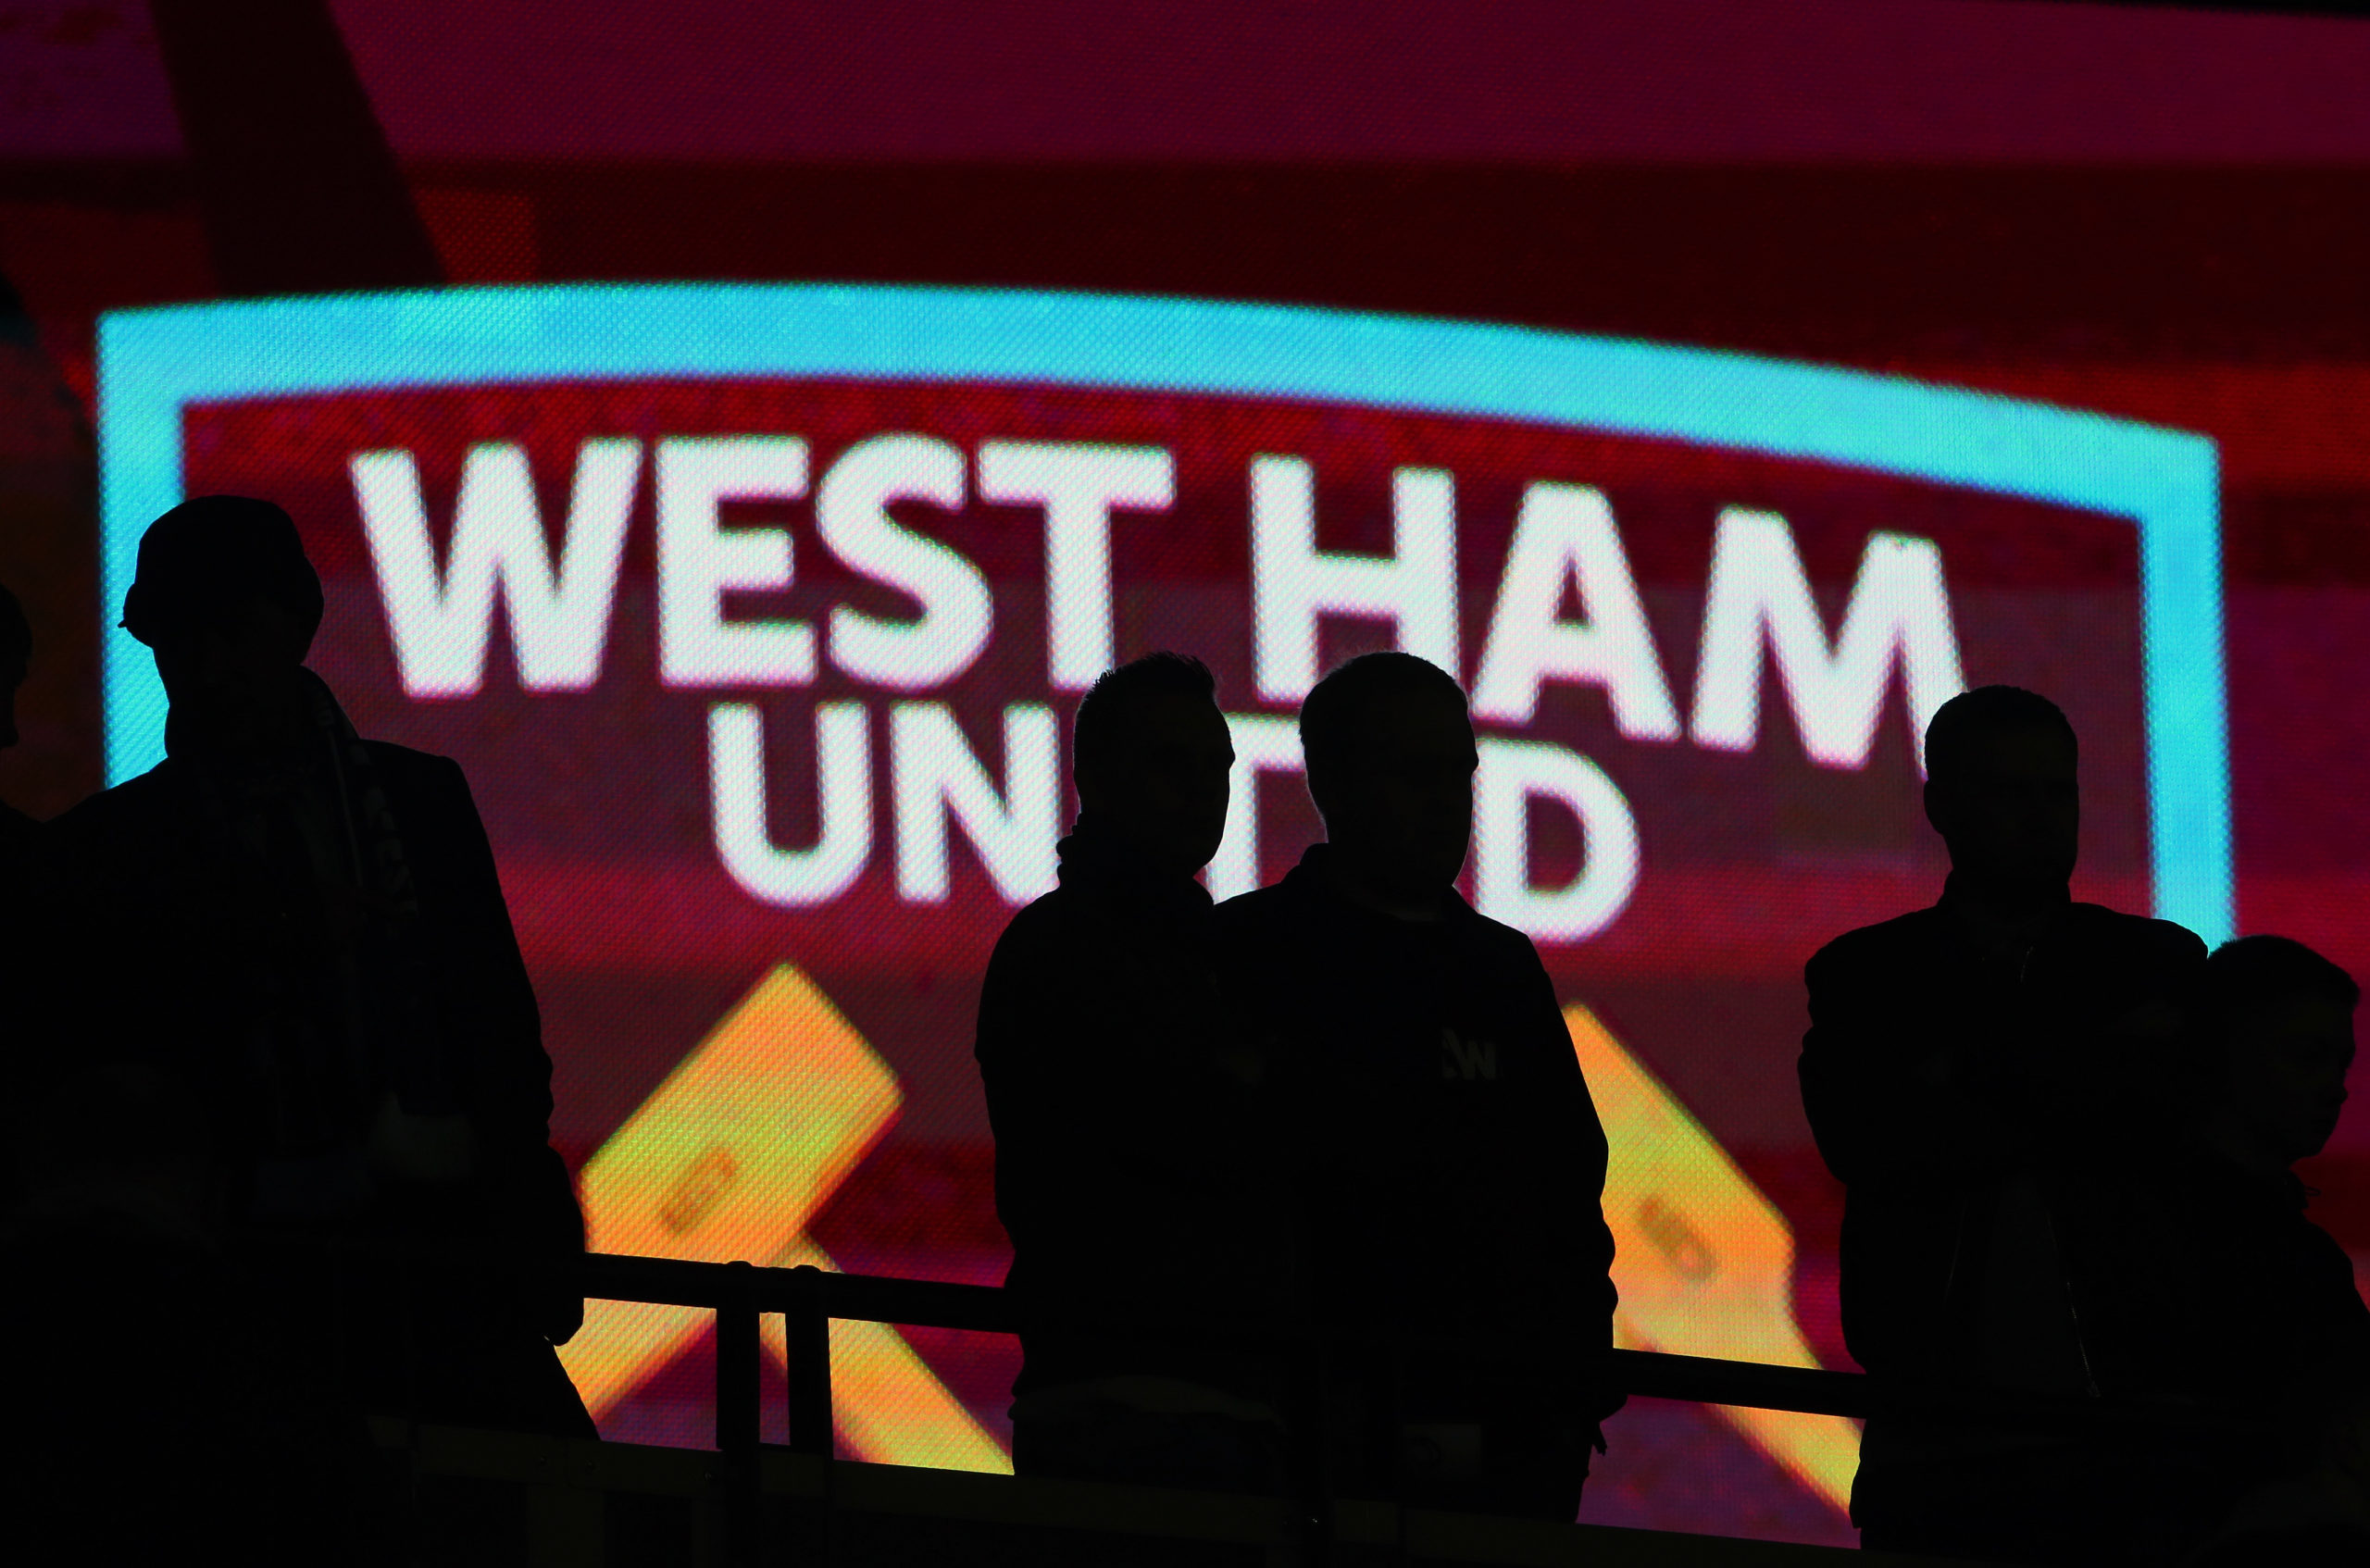 Key man behind the scenes at West Ham says emotional goodbye after four and a half years